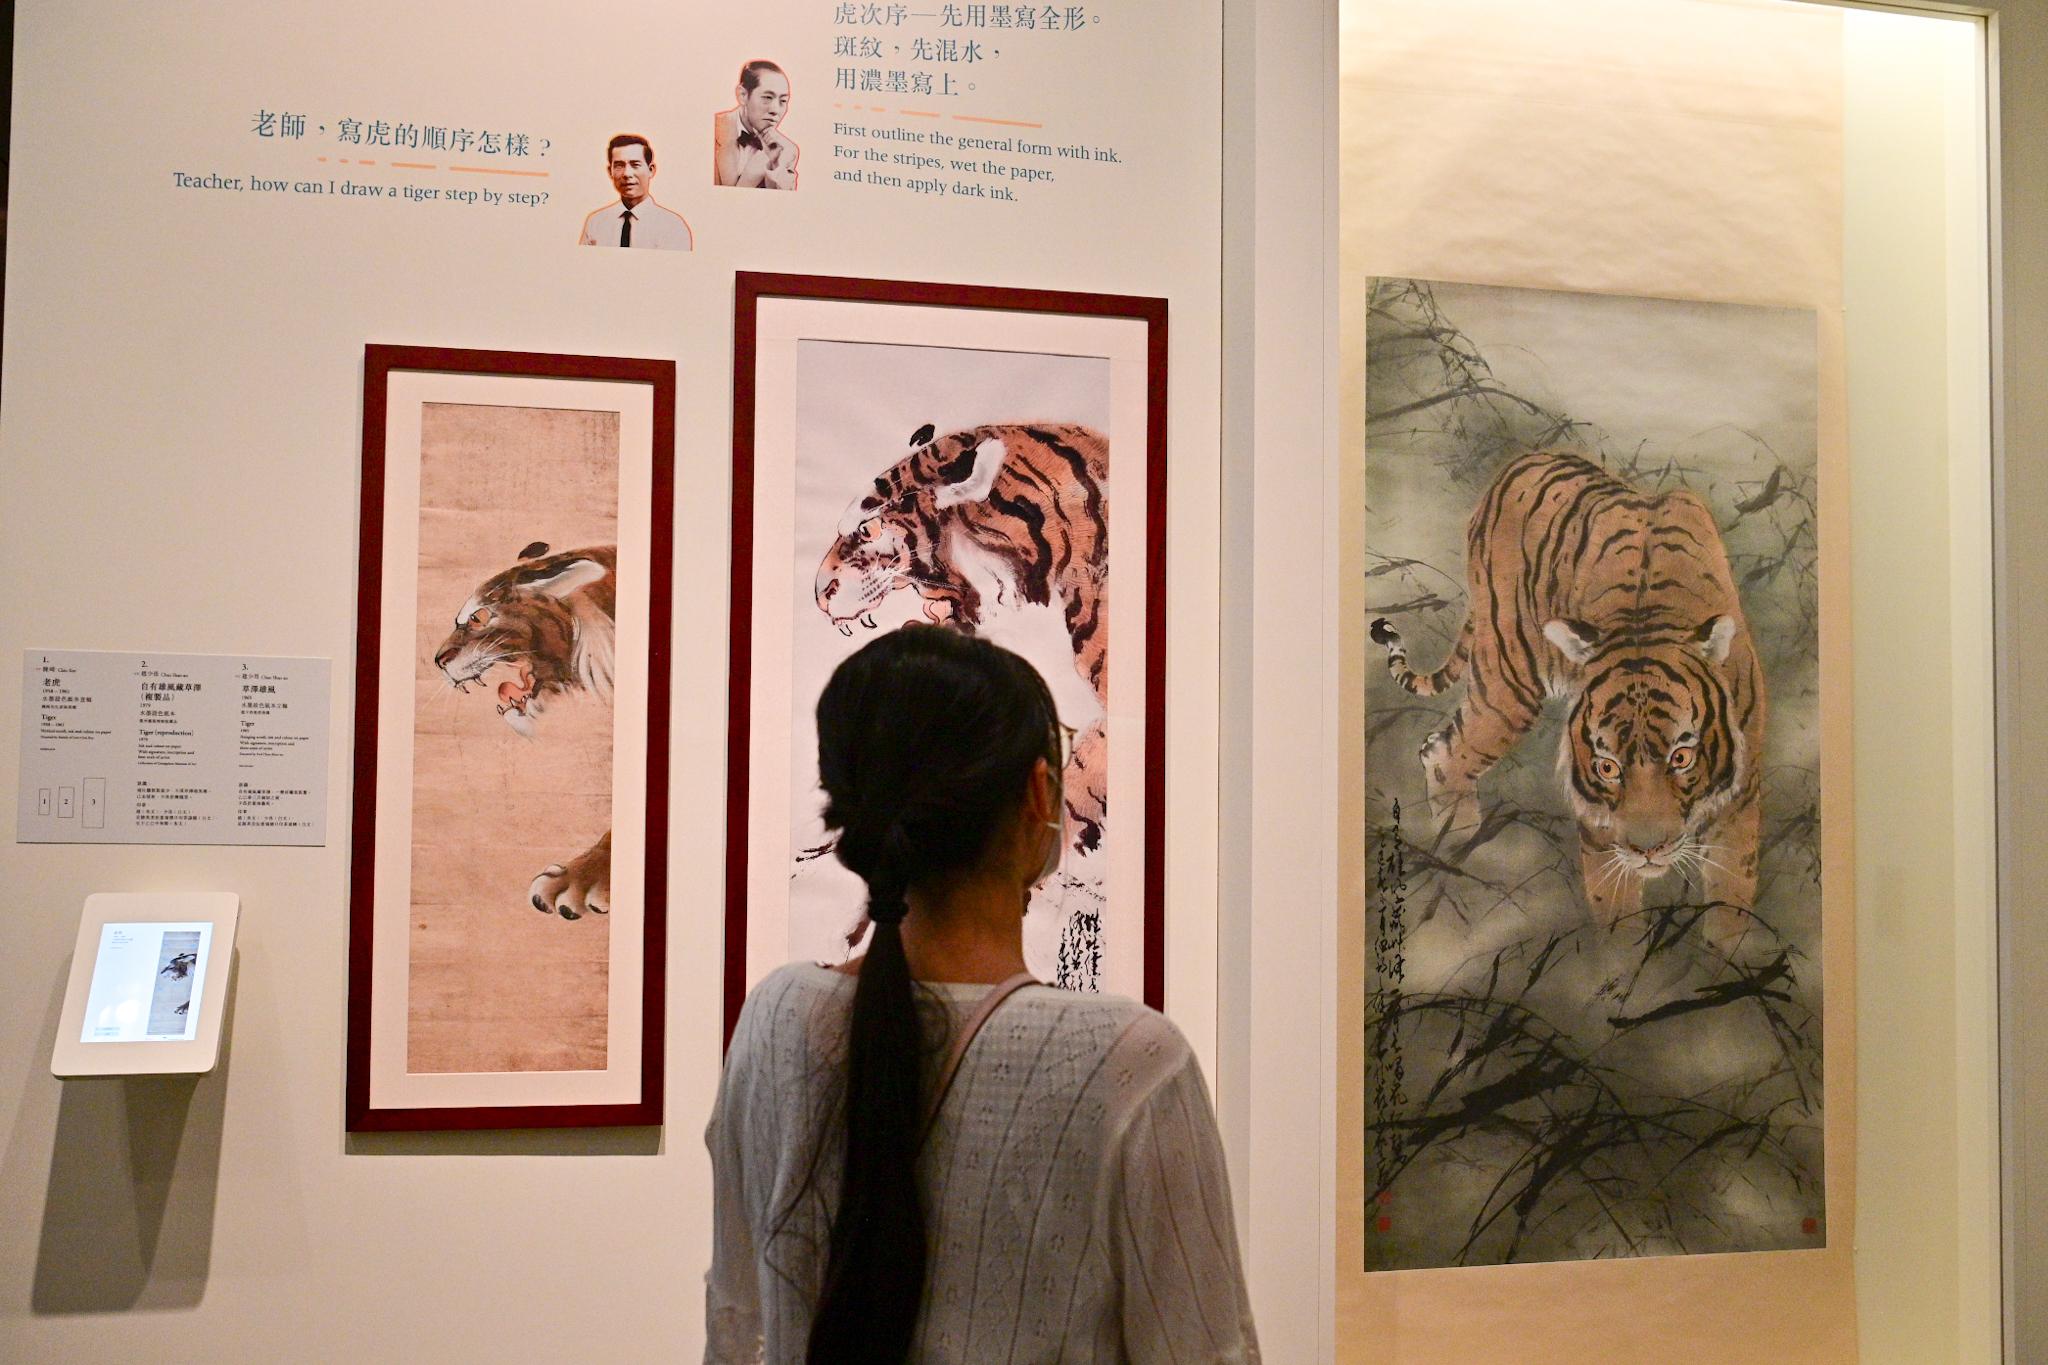 The exhibition "From a Distance: Art Dialogues between Chao Shao-an and Chin Kee" will be open to the public from tomorrow (September 21) at the Hong Kong Heritage Museum. Picture shows Chao Shao-an's and Chin Kee's paintings on tigers. From left: Chin's painting "Tiger", Chao's painting "Tiger" (reproduction) and Chao's painting "Tiger".